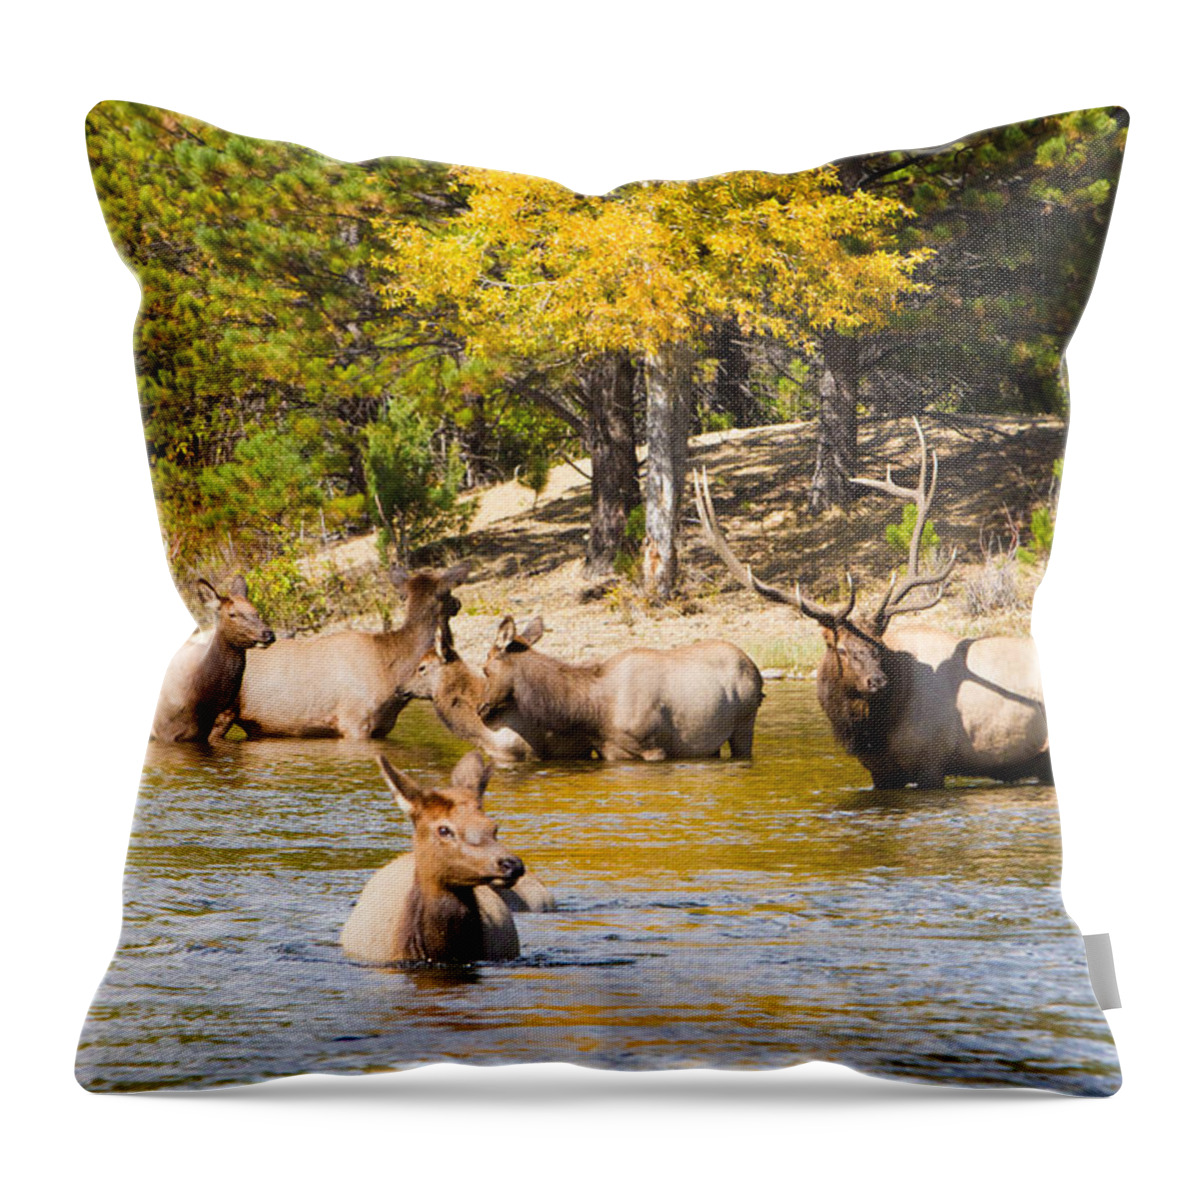 'estes Park' Throw Pillow featuring the photograph Bull Elk Watching Over Herd 4 by James BO Insogna